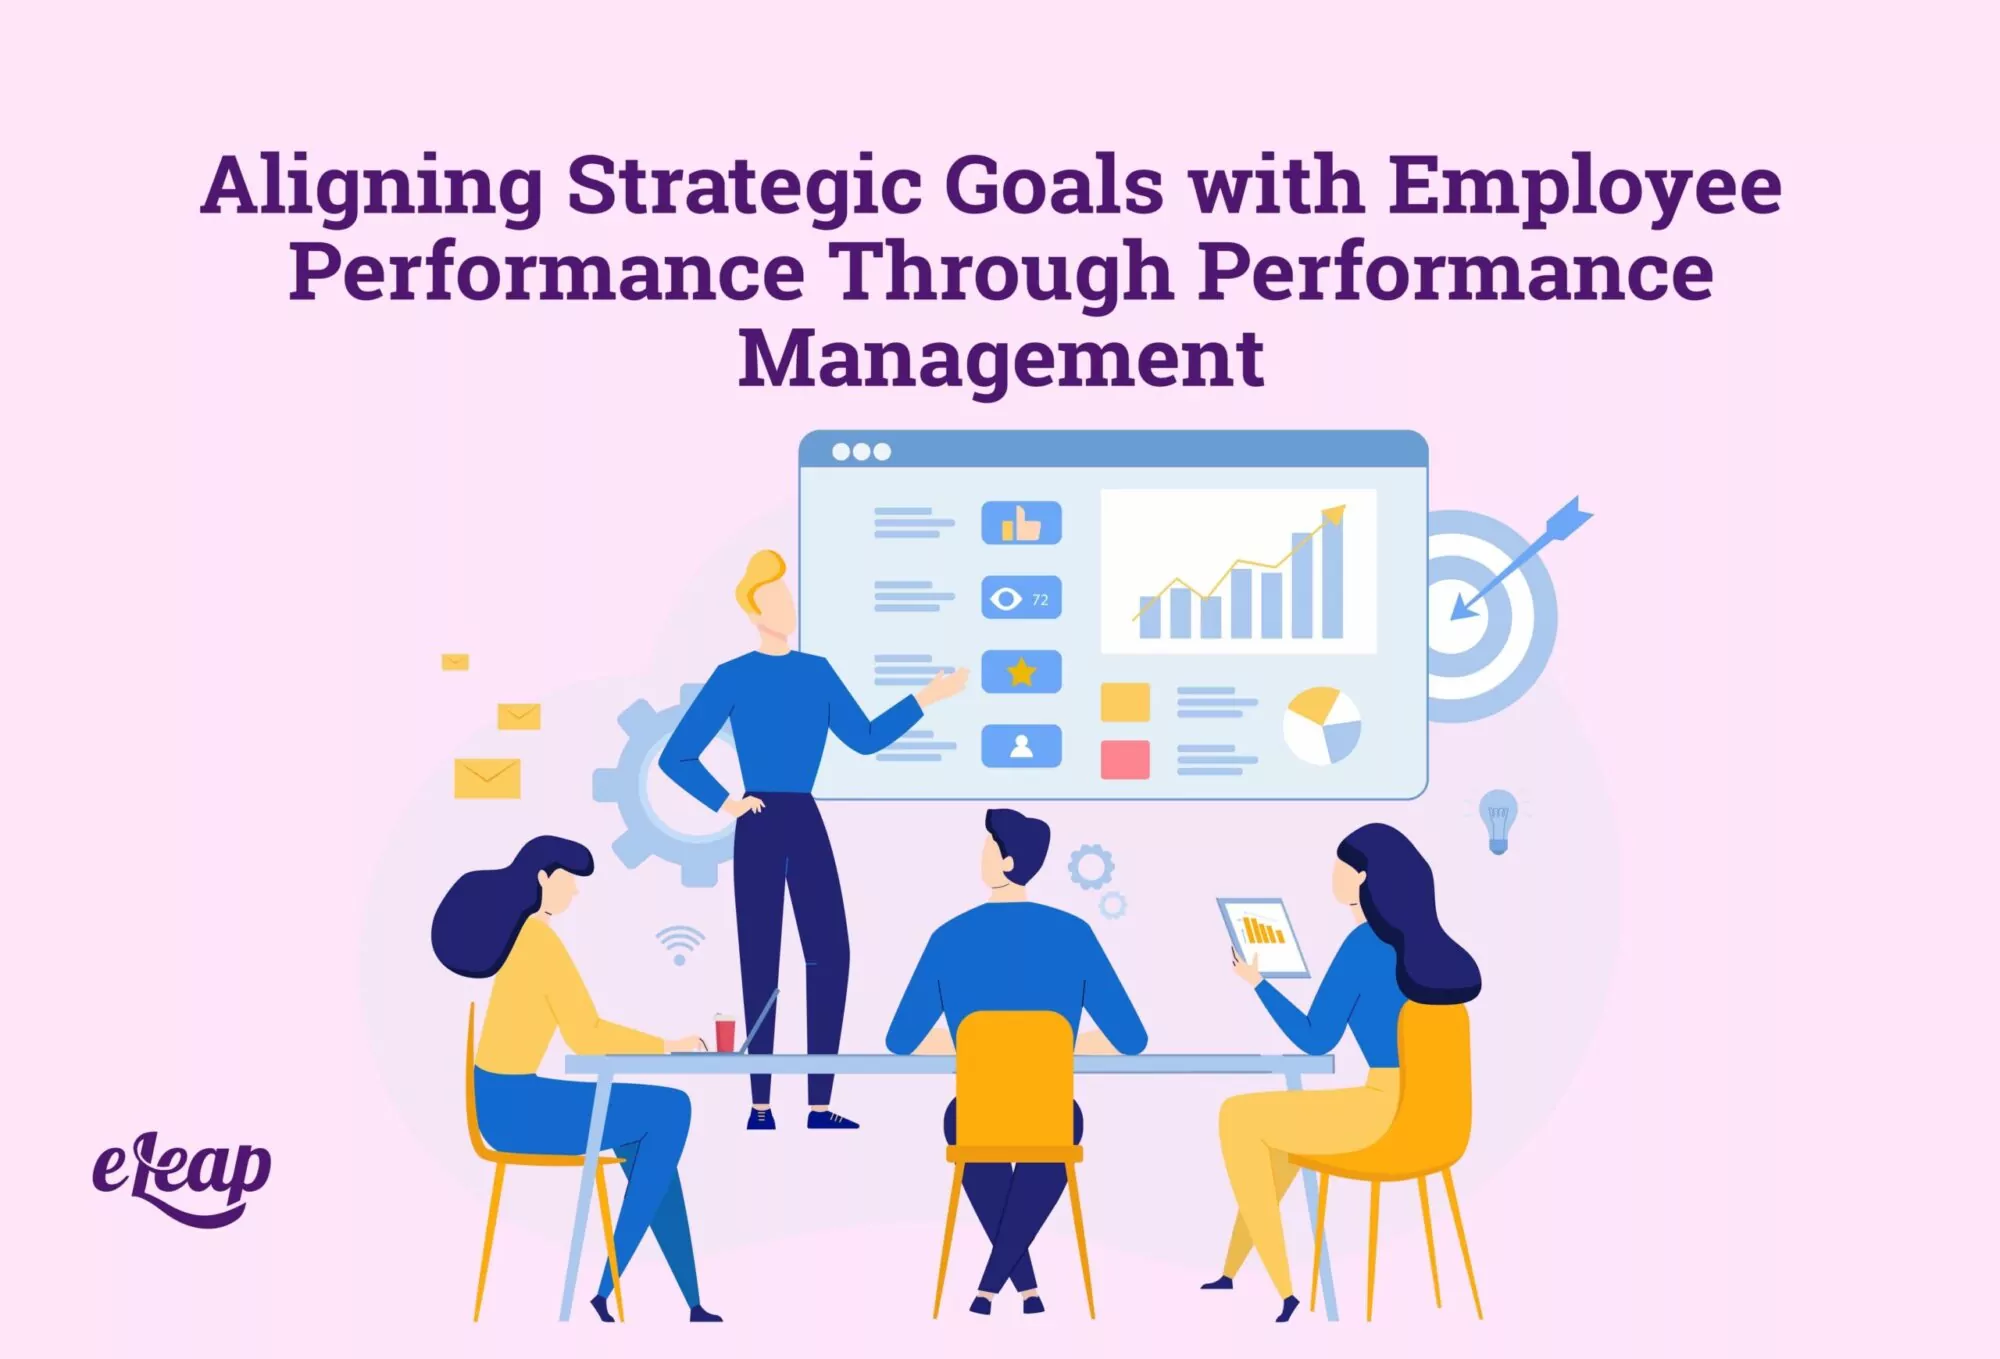 Aligning Strategic Goals with Employee Performance Through Performance Management